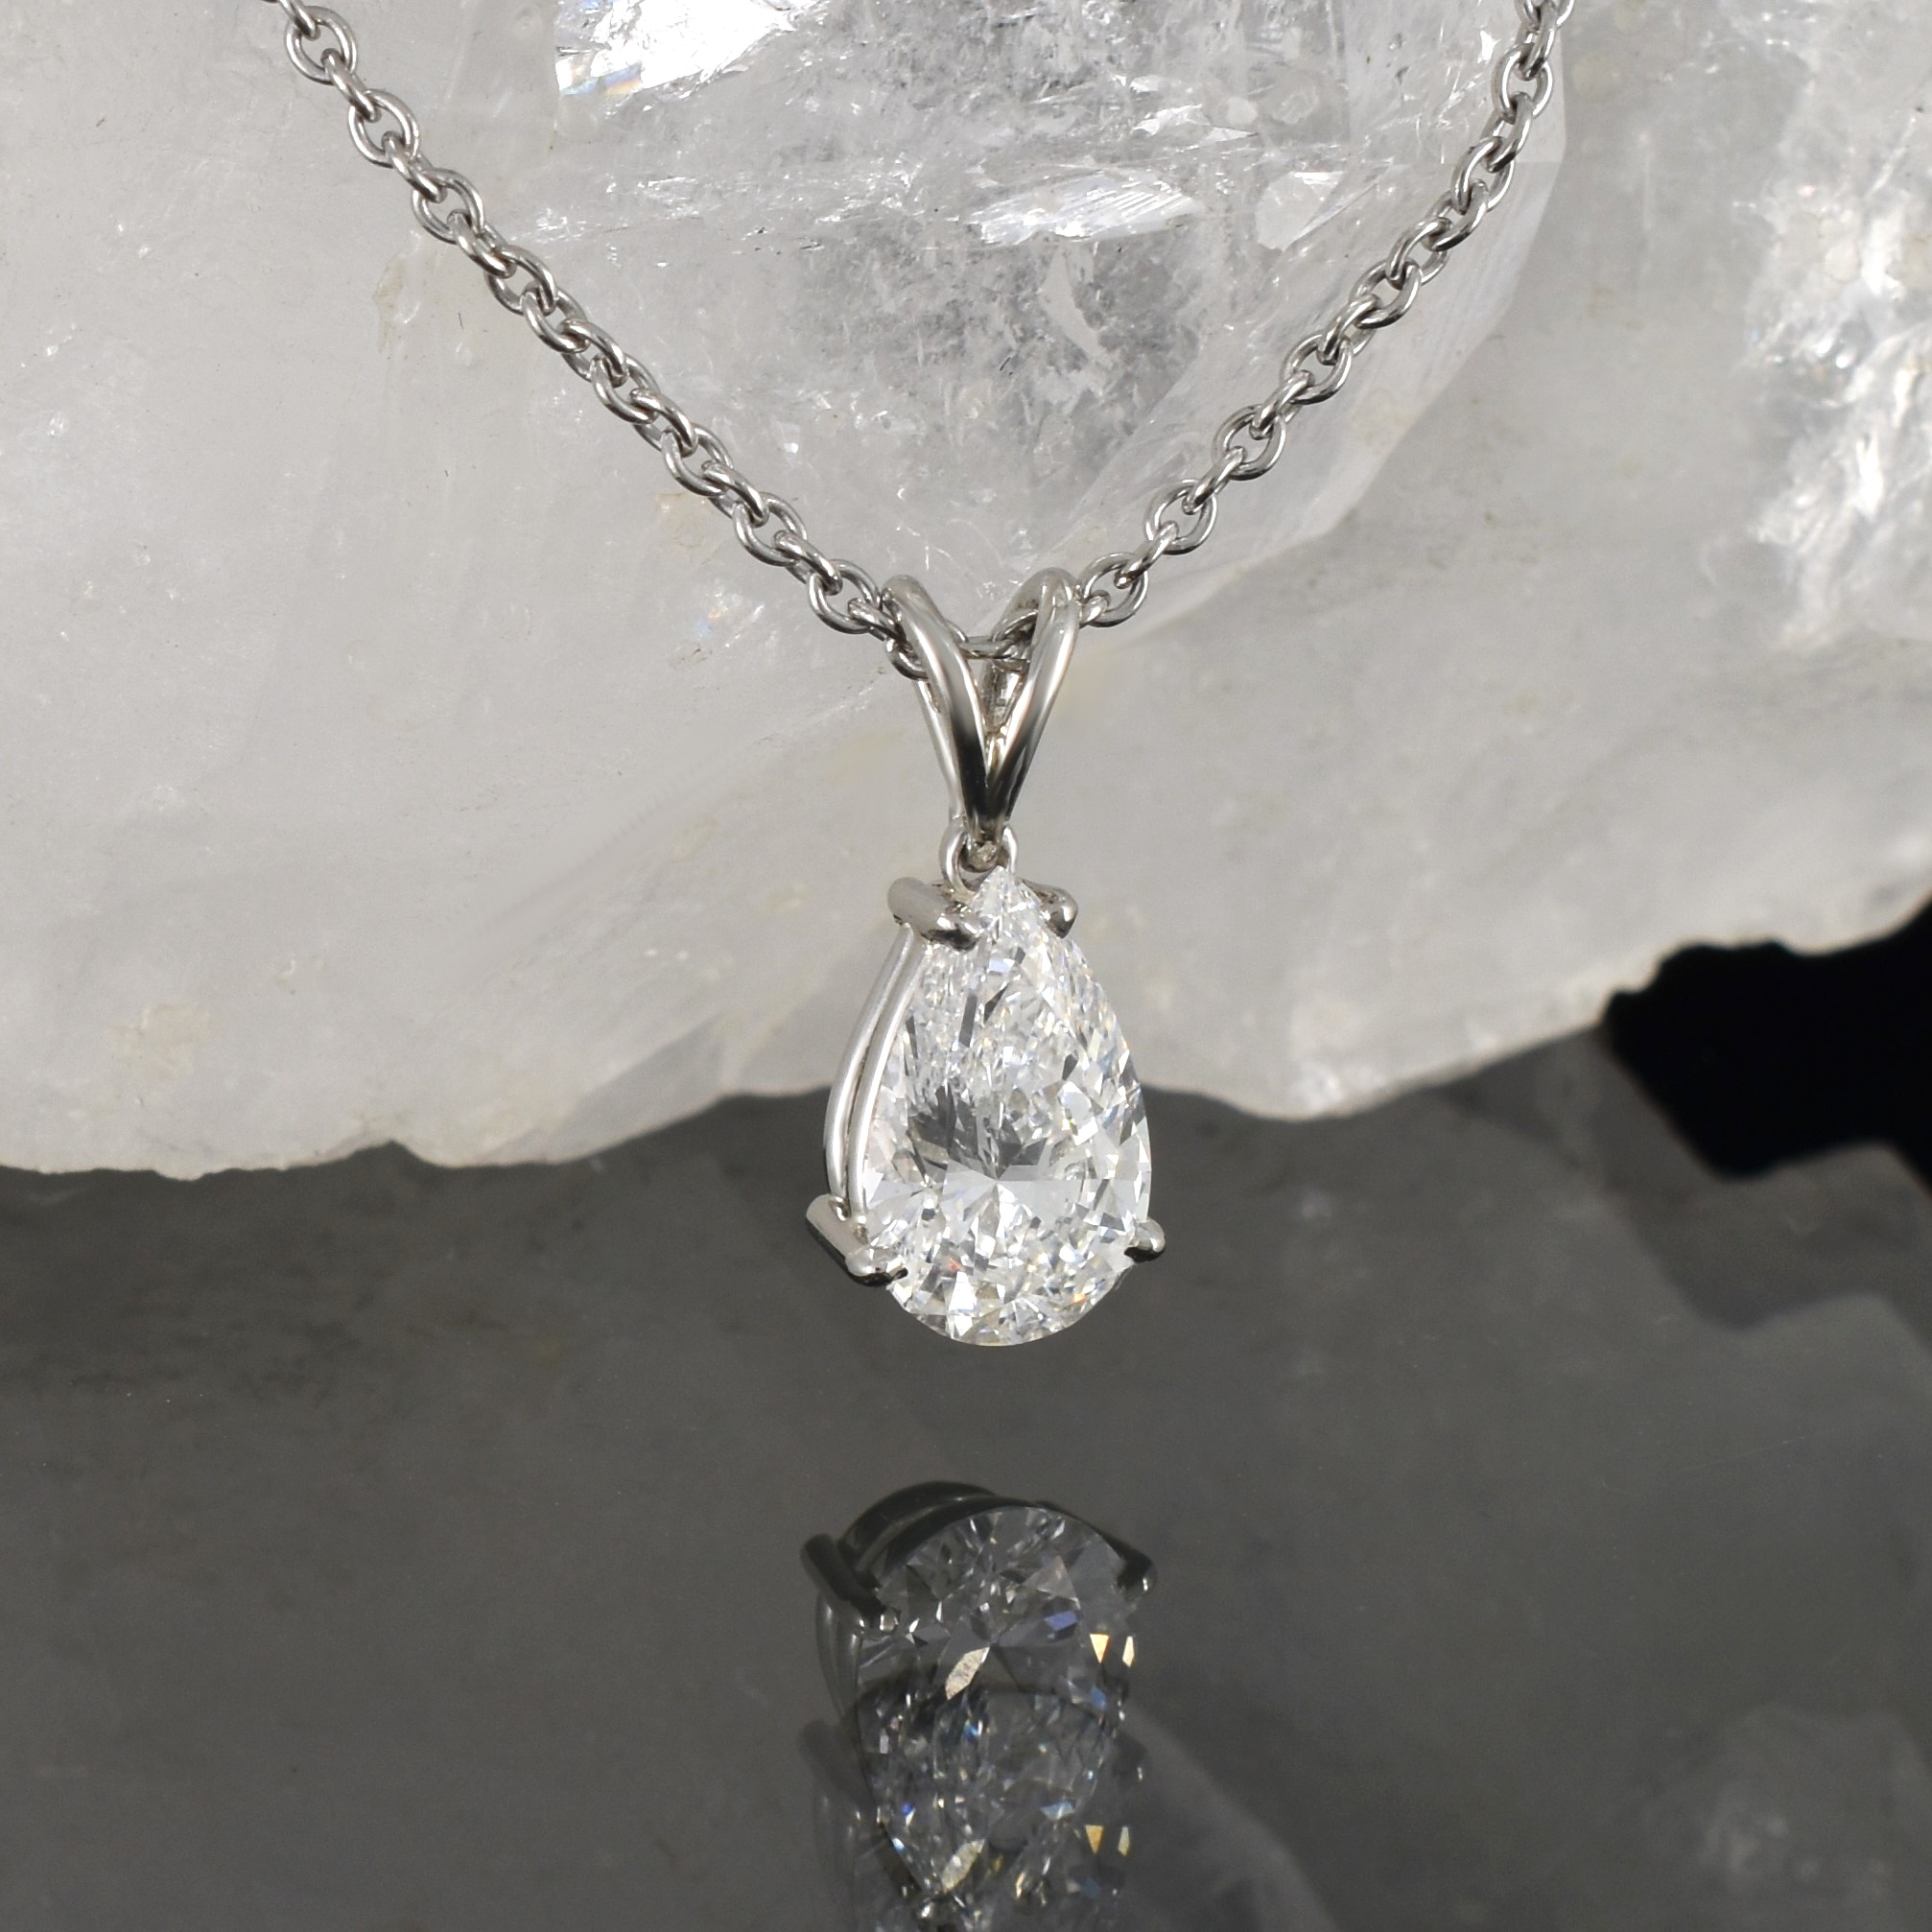 right view of a 2.06 carat teardrop shaped diamond set in a 4 claw platinum setting hanging on platinum chain.